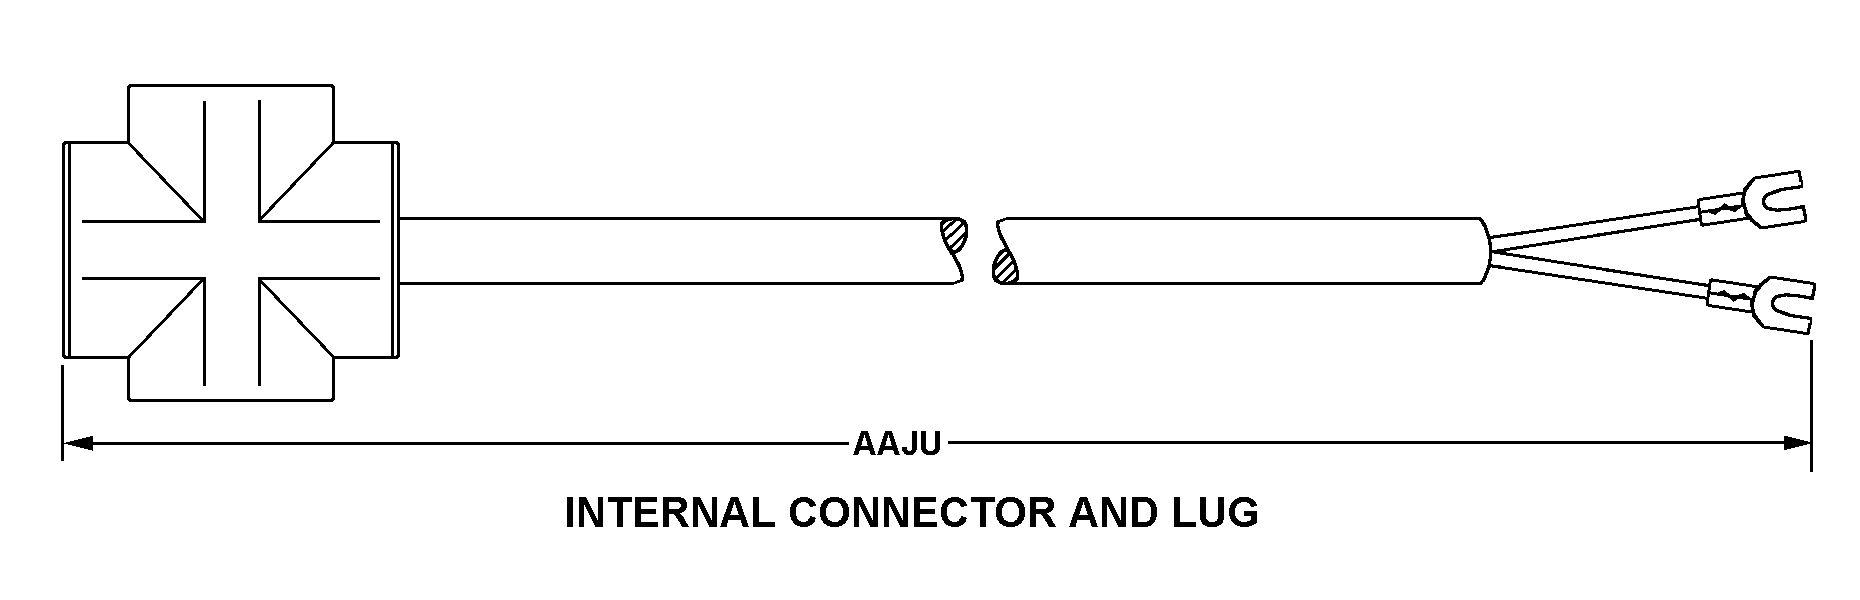 INTERNAL CONNECTOR AND LUG style nsn 5995-00-622-9364